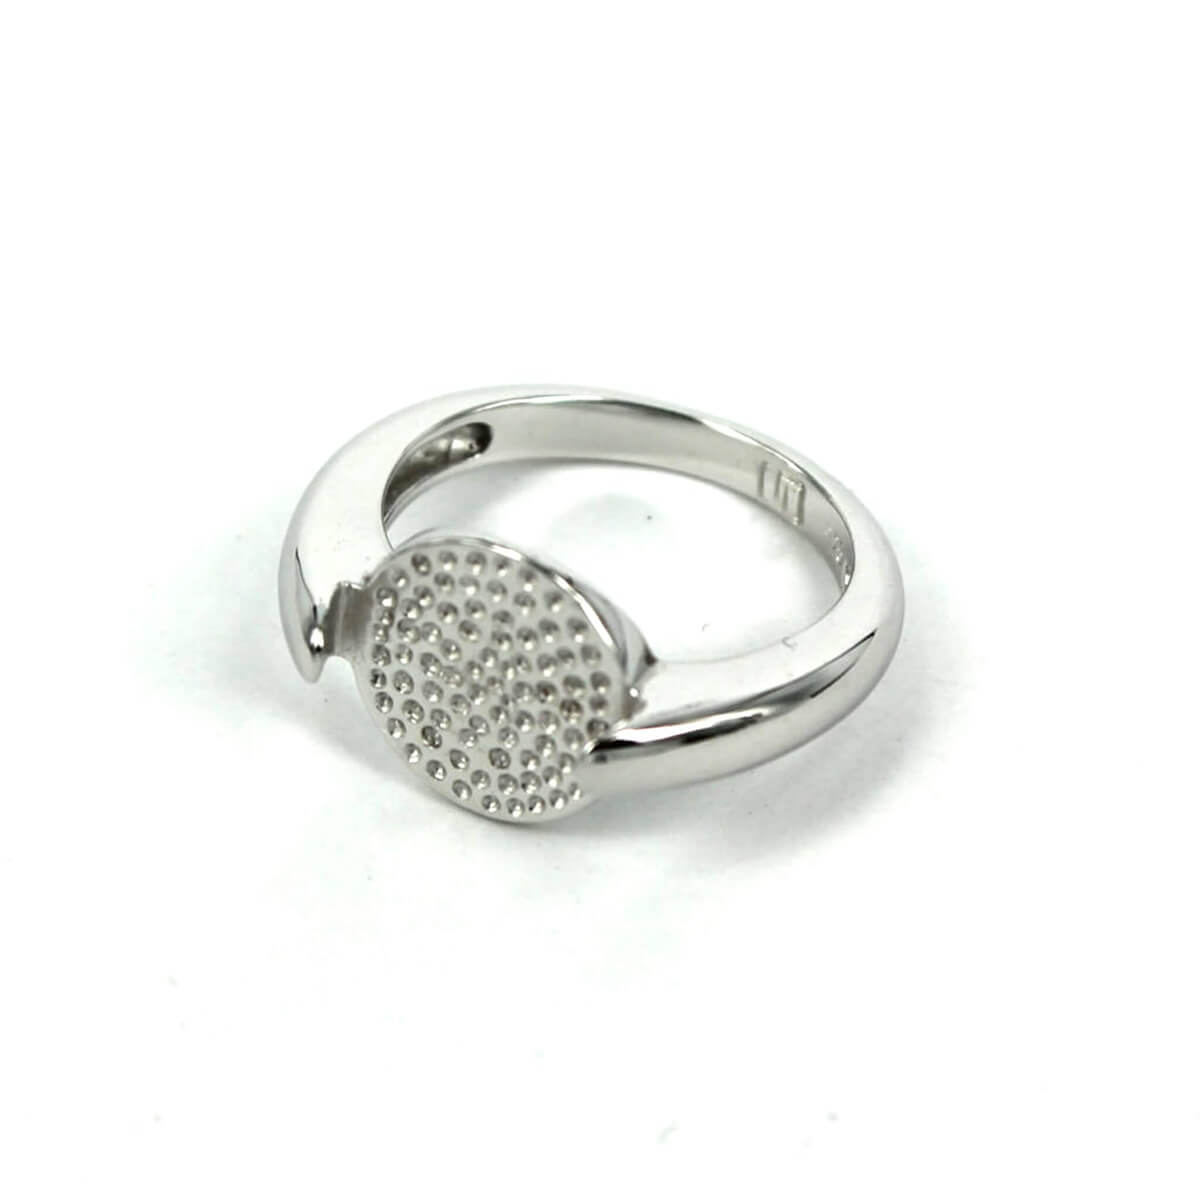 Ring with Shanks Round Bezel Mounting in Sterling Silver 12x12mm